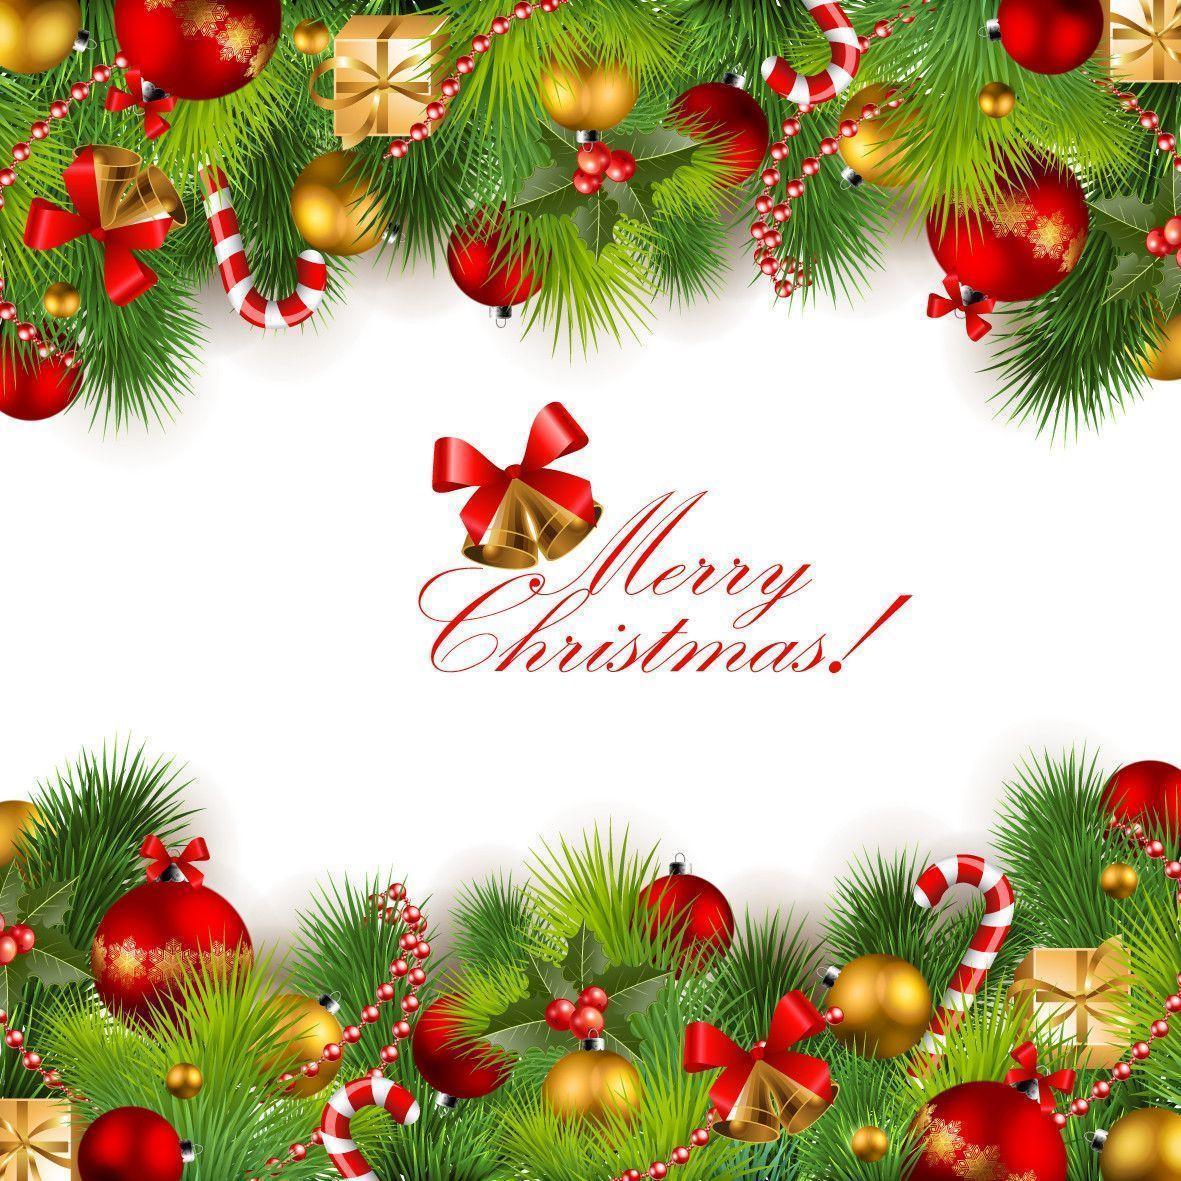 Beautiful christmas background 01 vector Free Vector / 4Vector